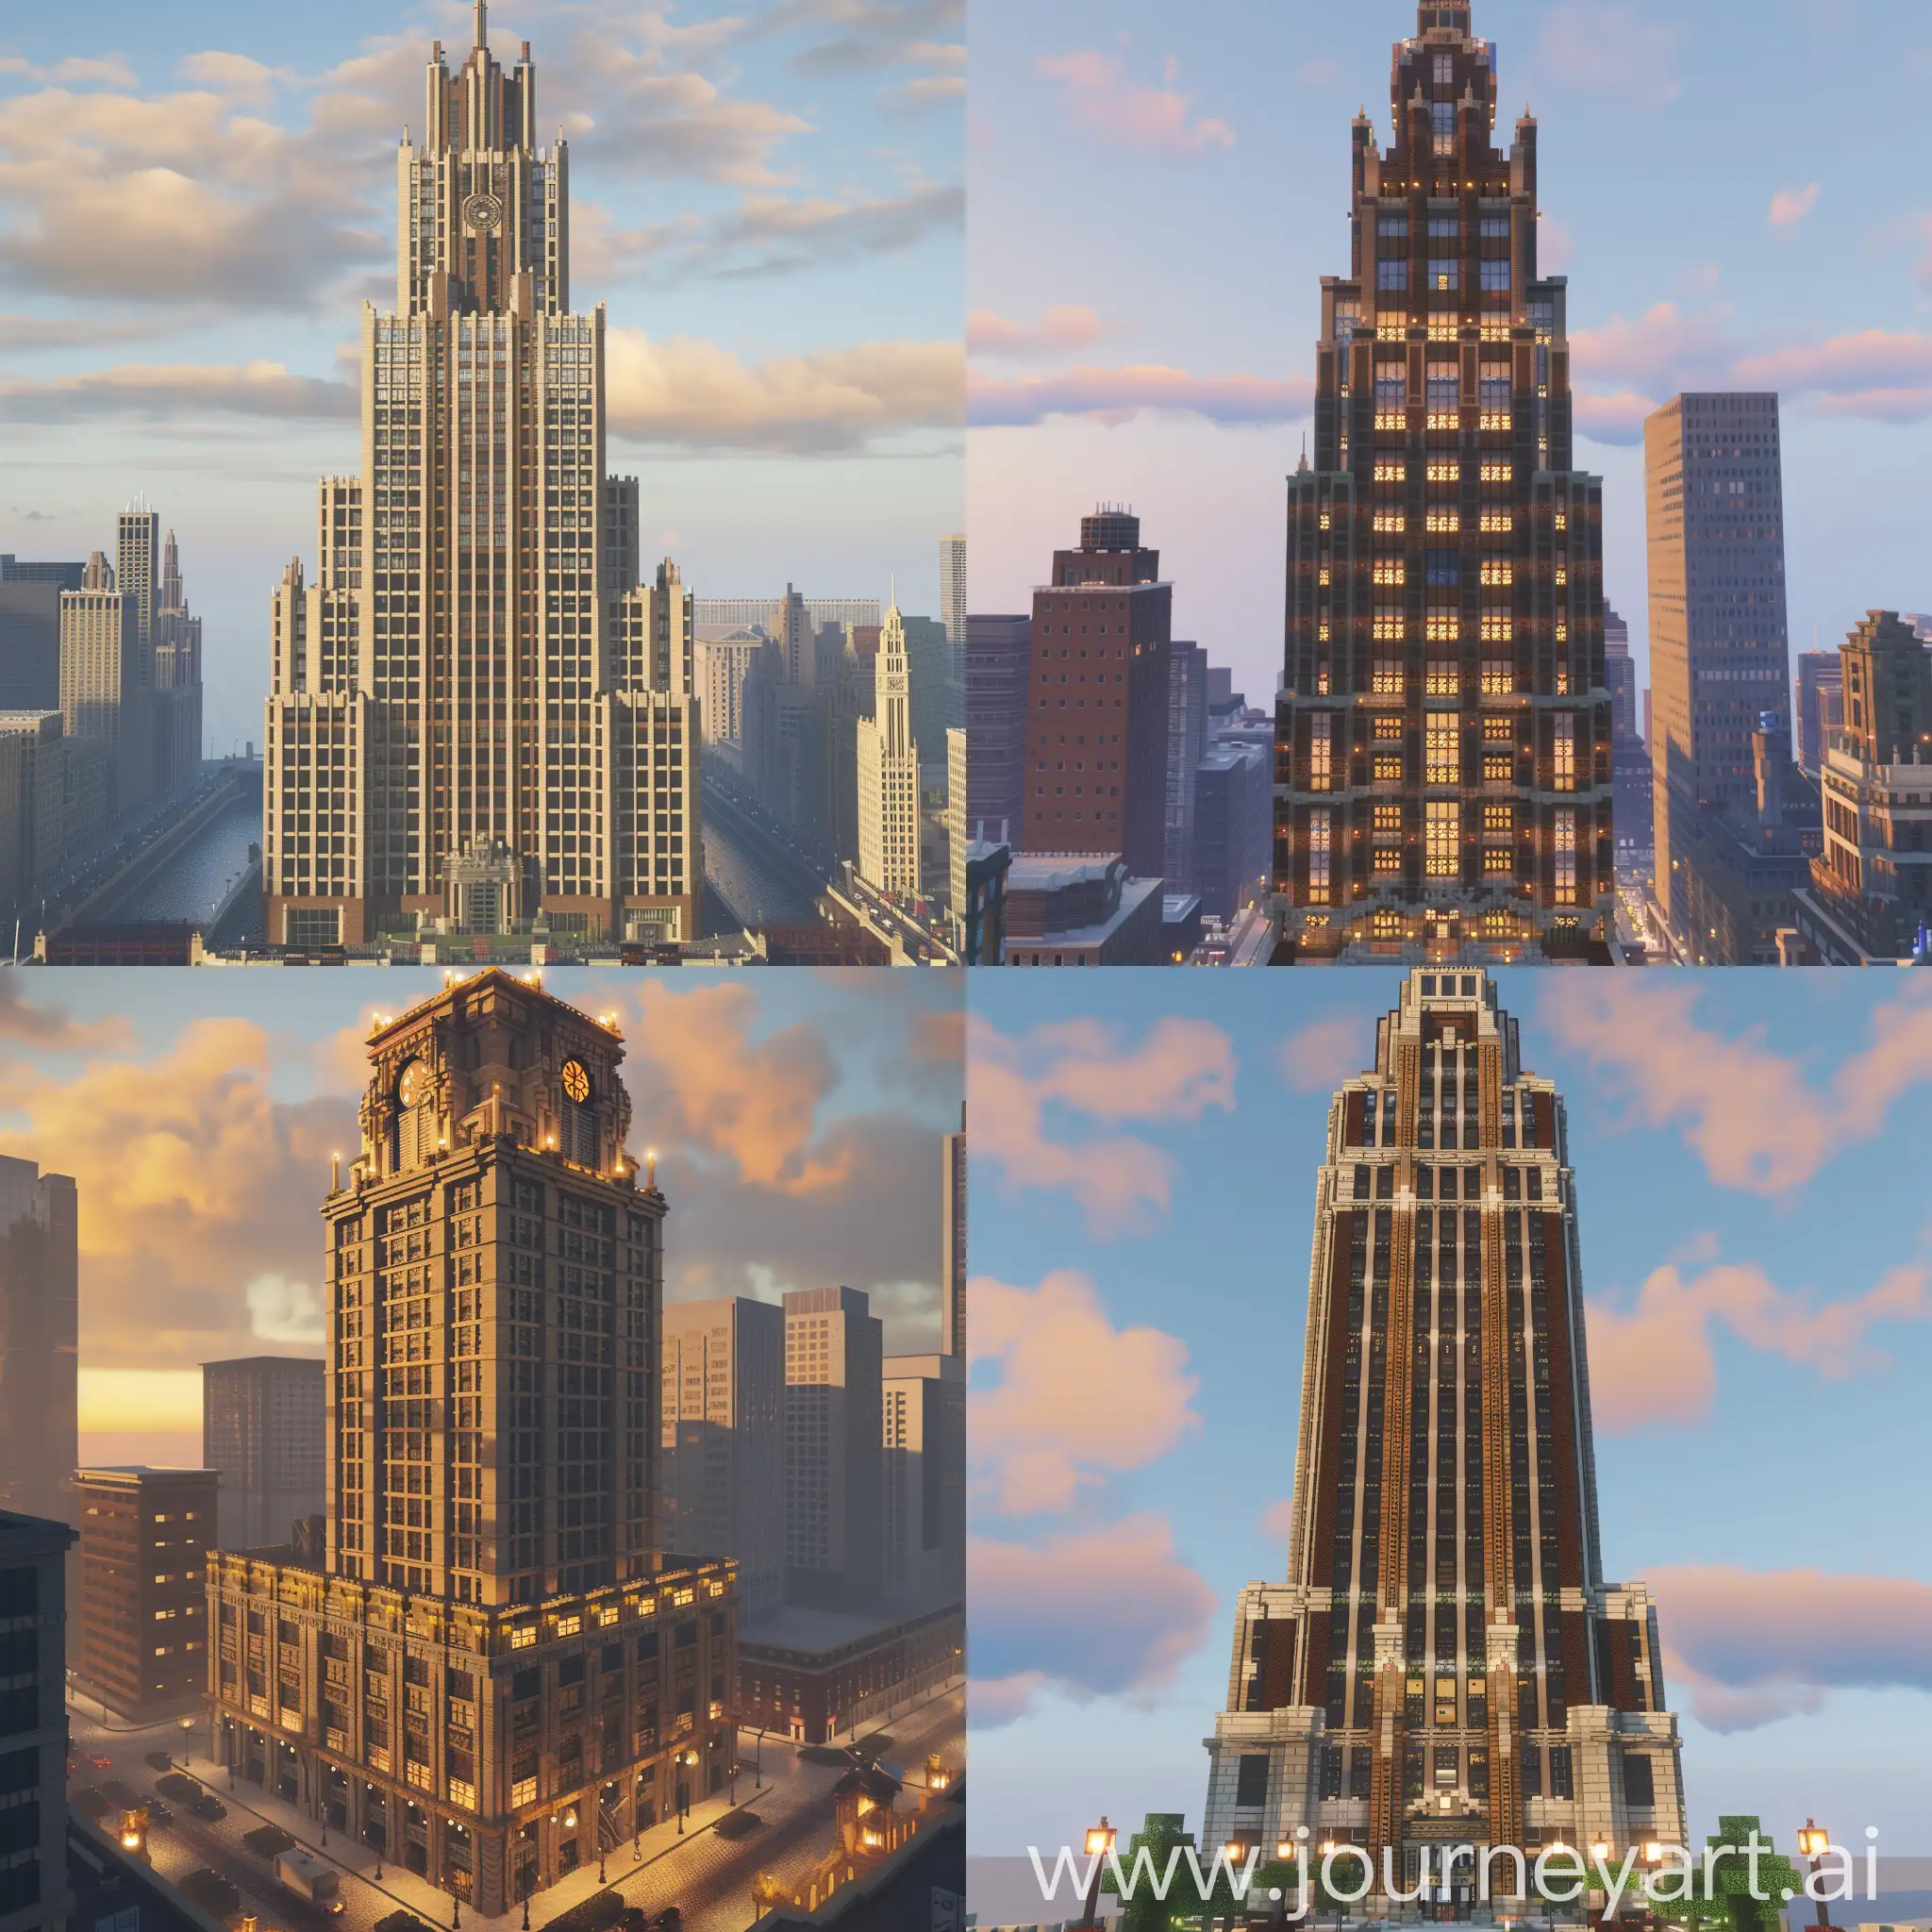 1920s-Chicago-Style-Skyscraper-at-Dusk